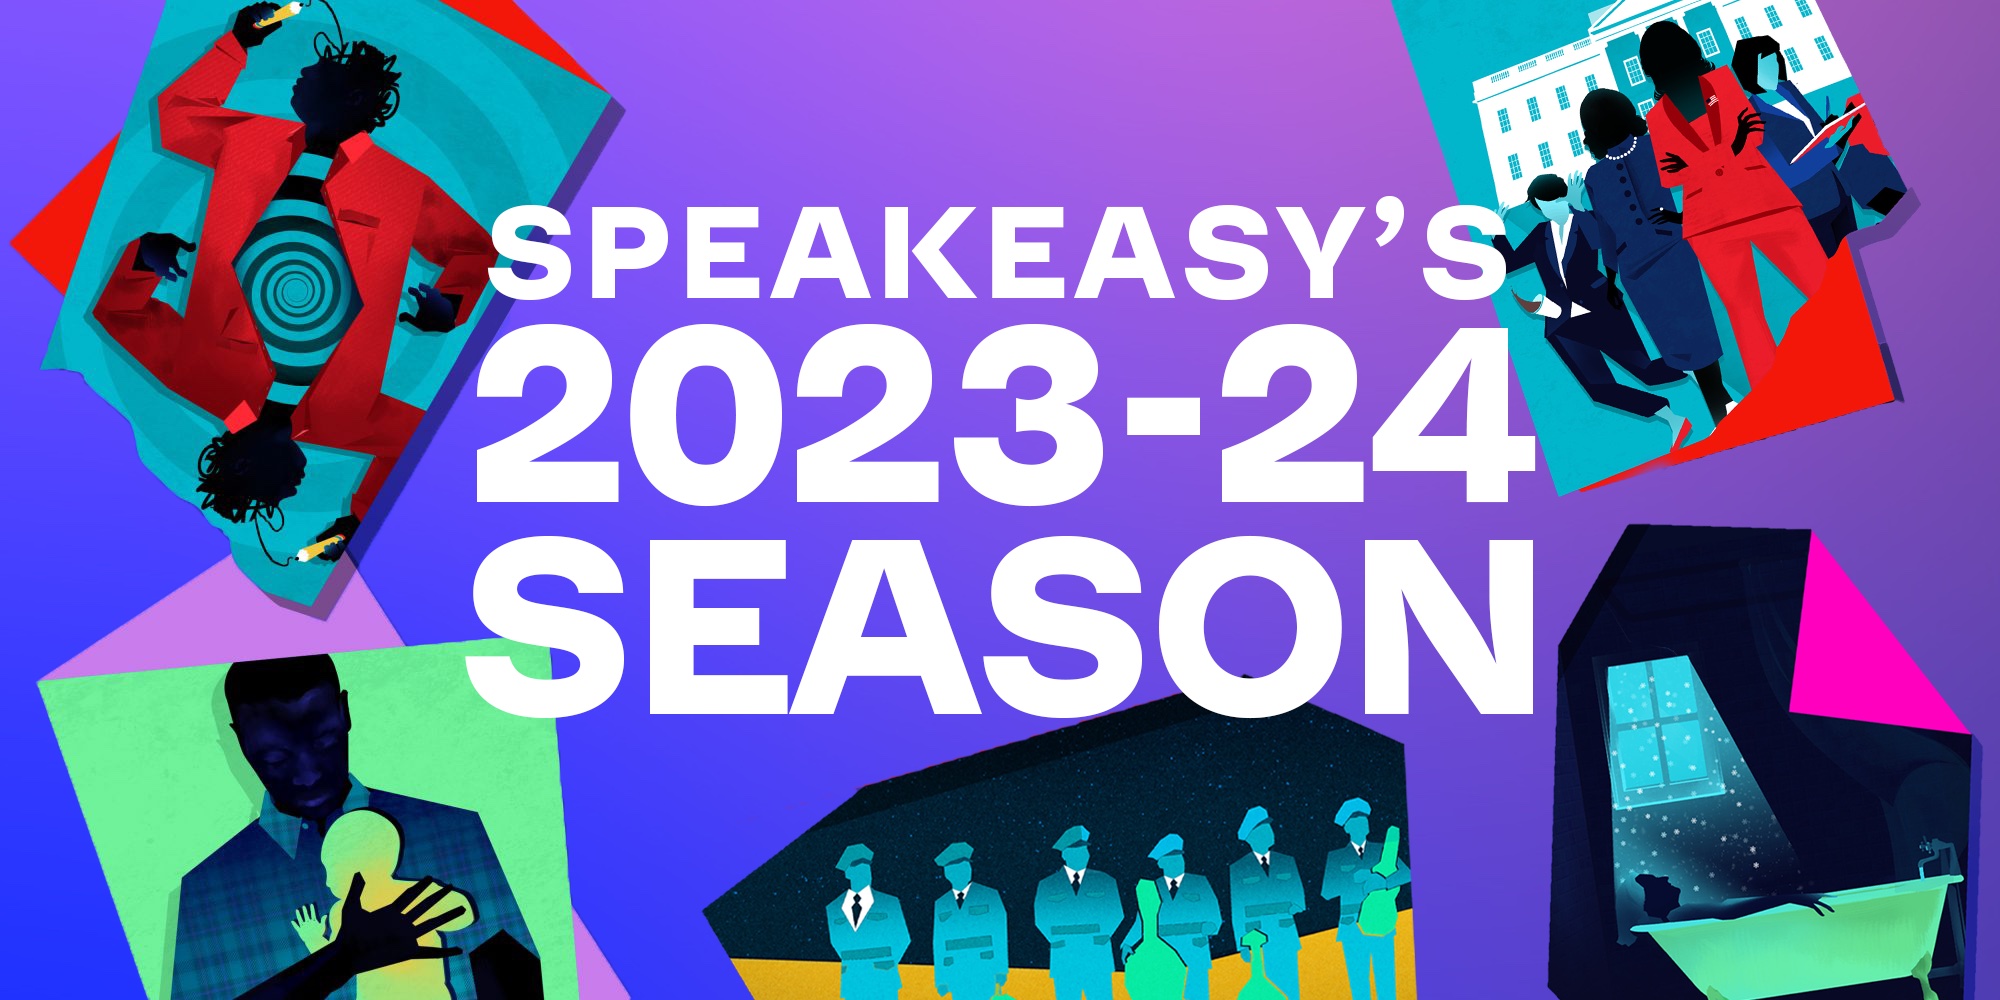 Join The Speakeasy Stage Company for Season 33 (2023 - 2024)